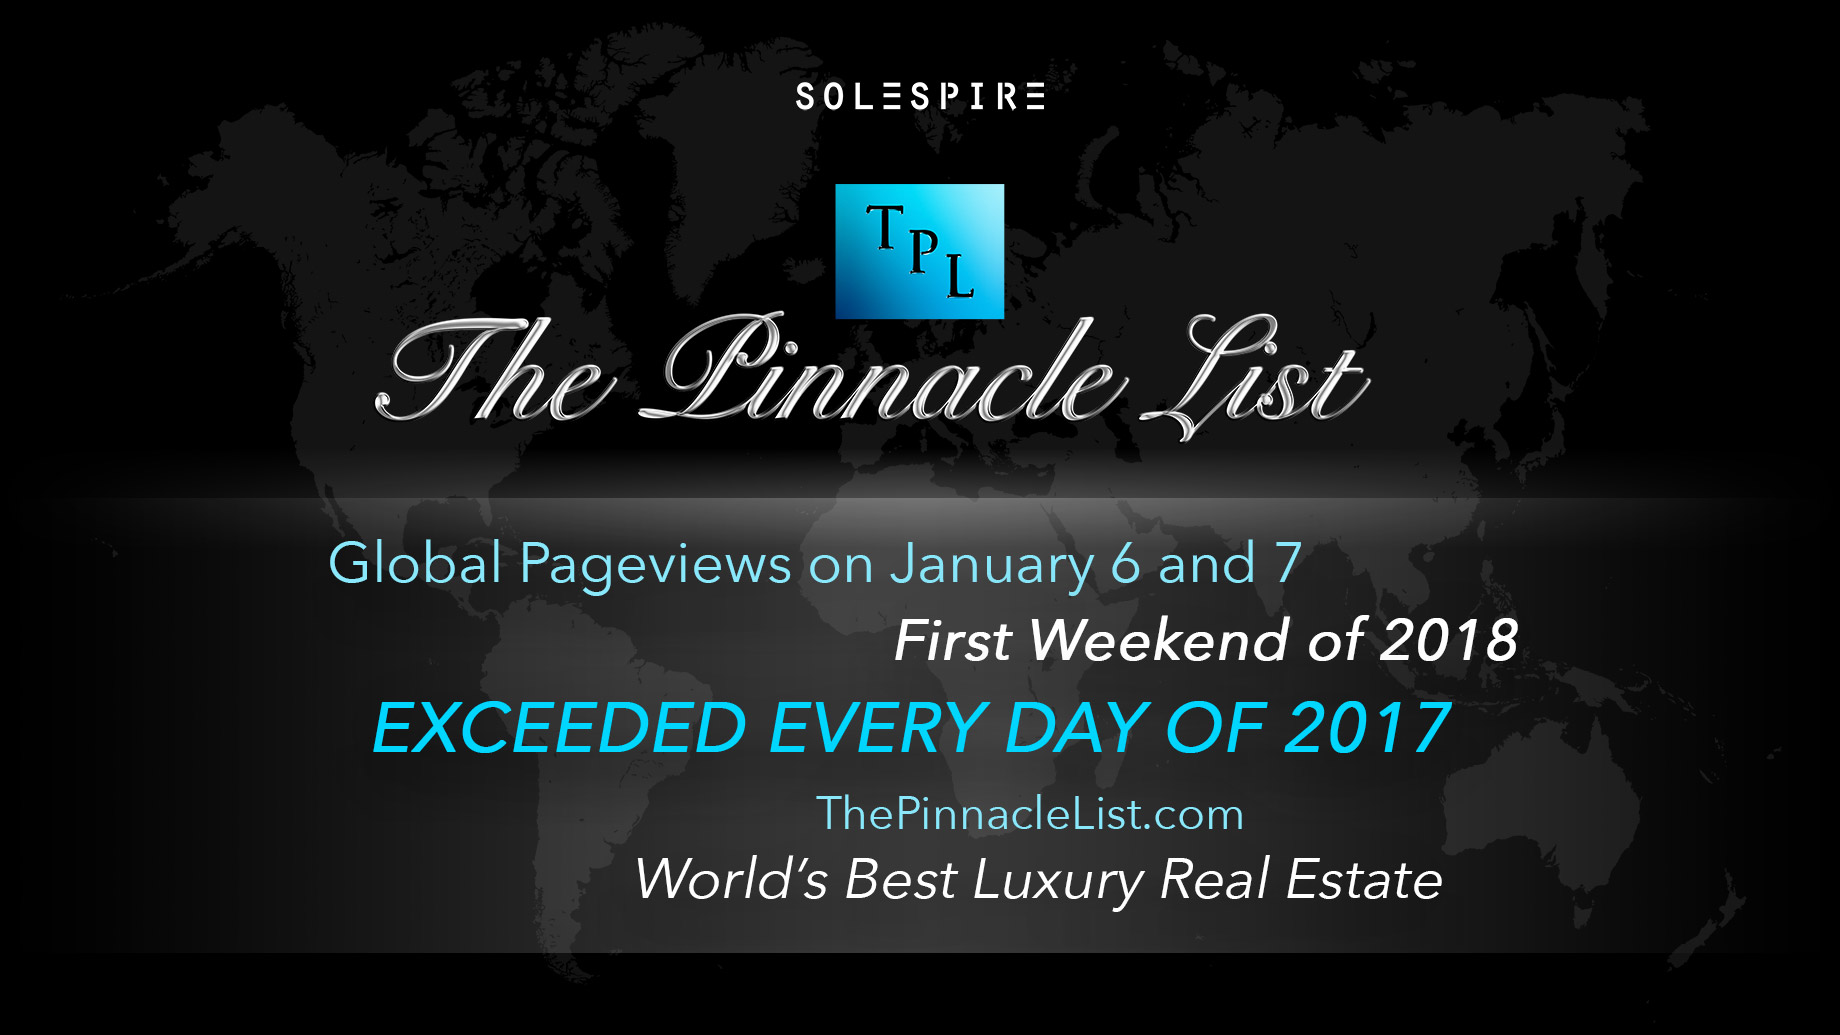 The First Weekend of 2018 Exceeds Daily Global Pageviews of 2017 on The Pinnacle List